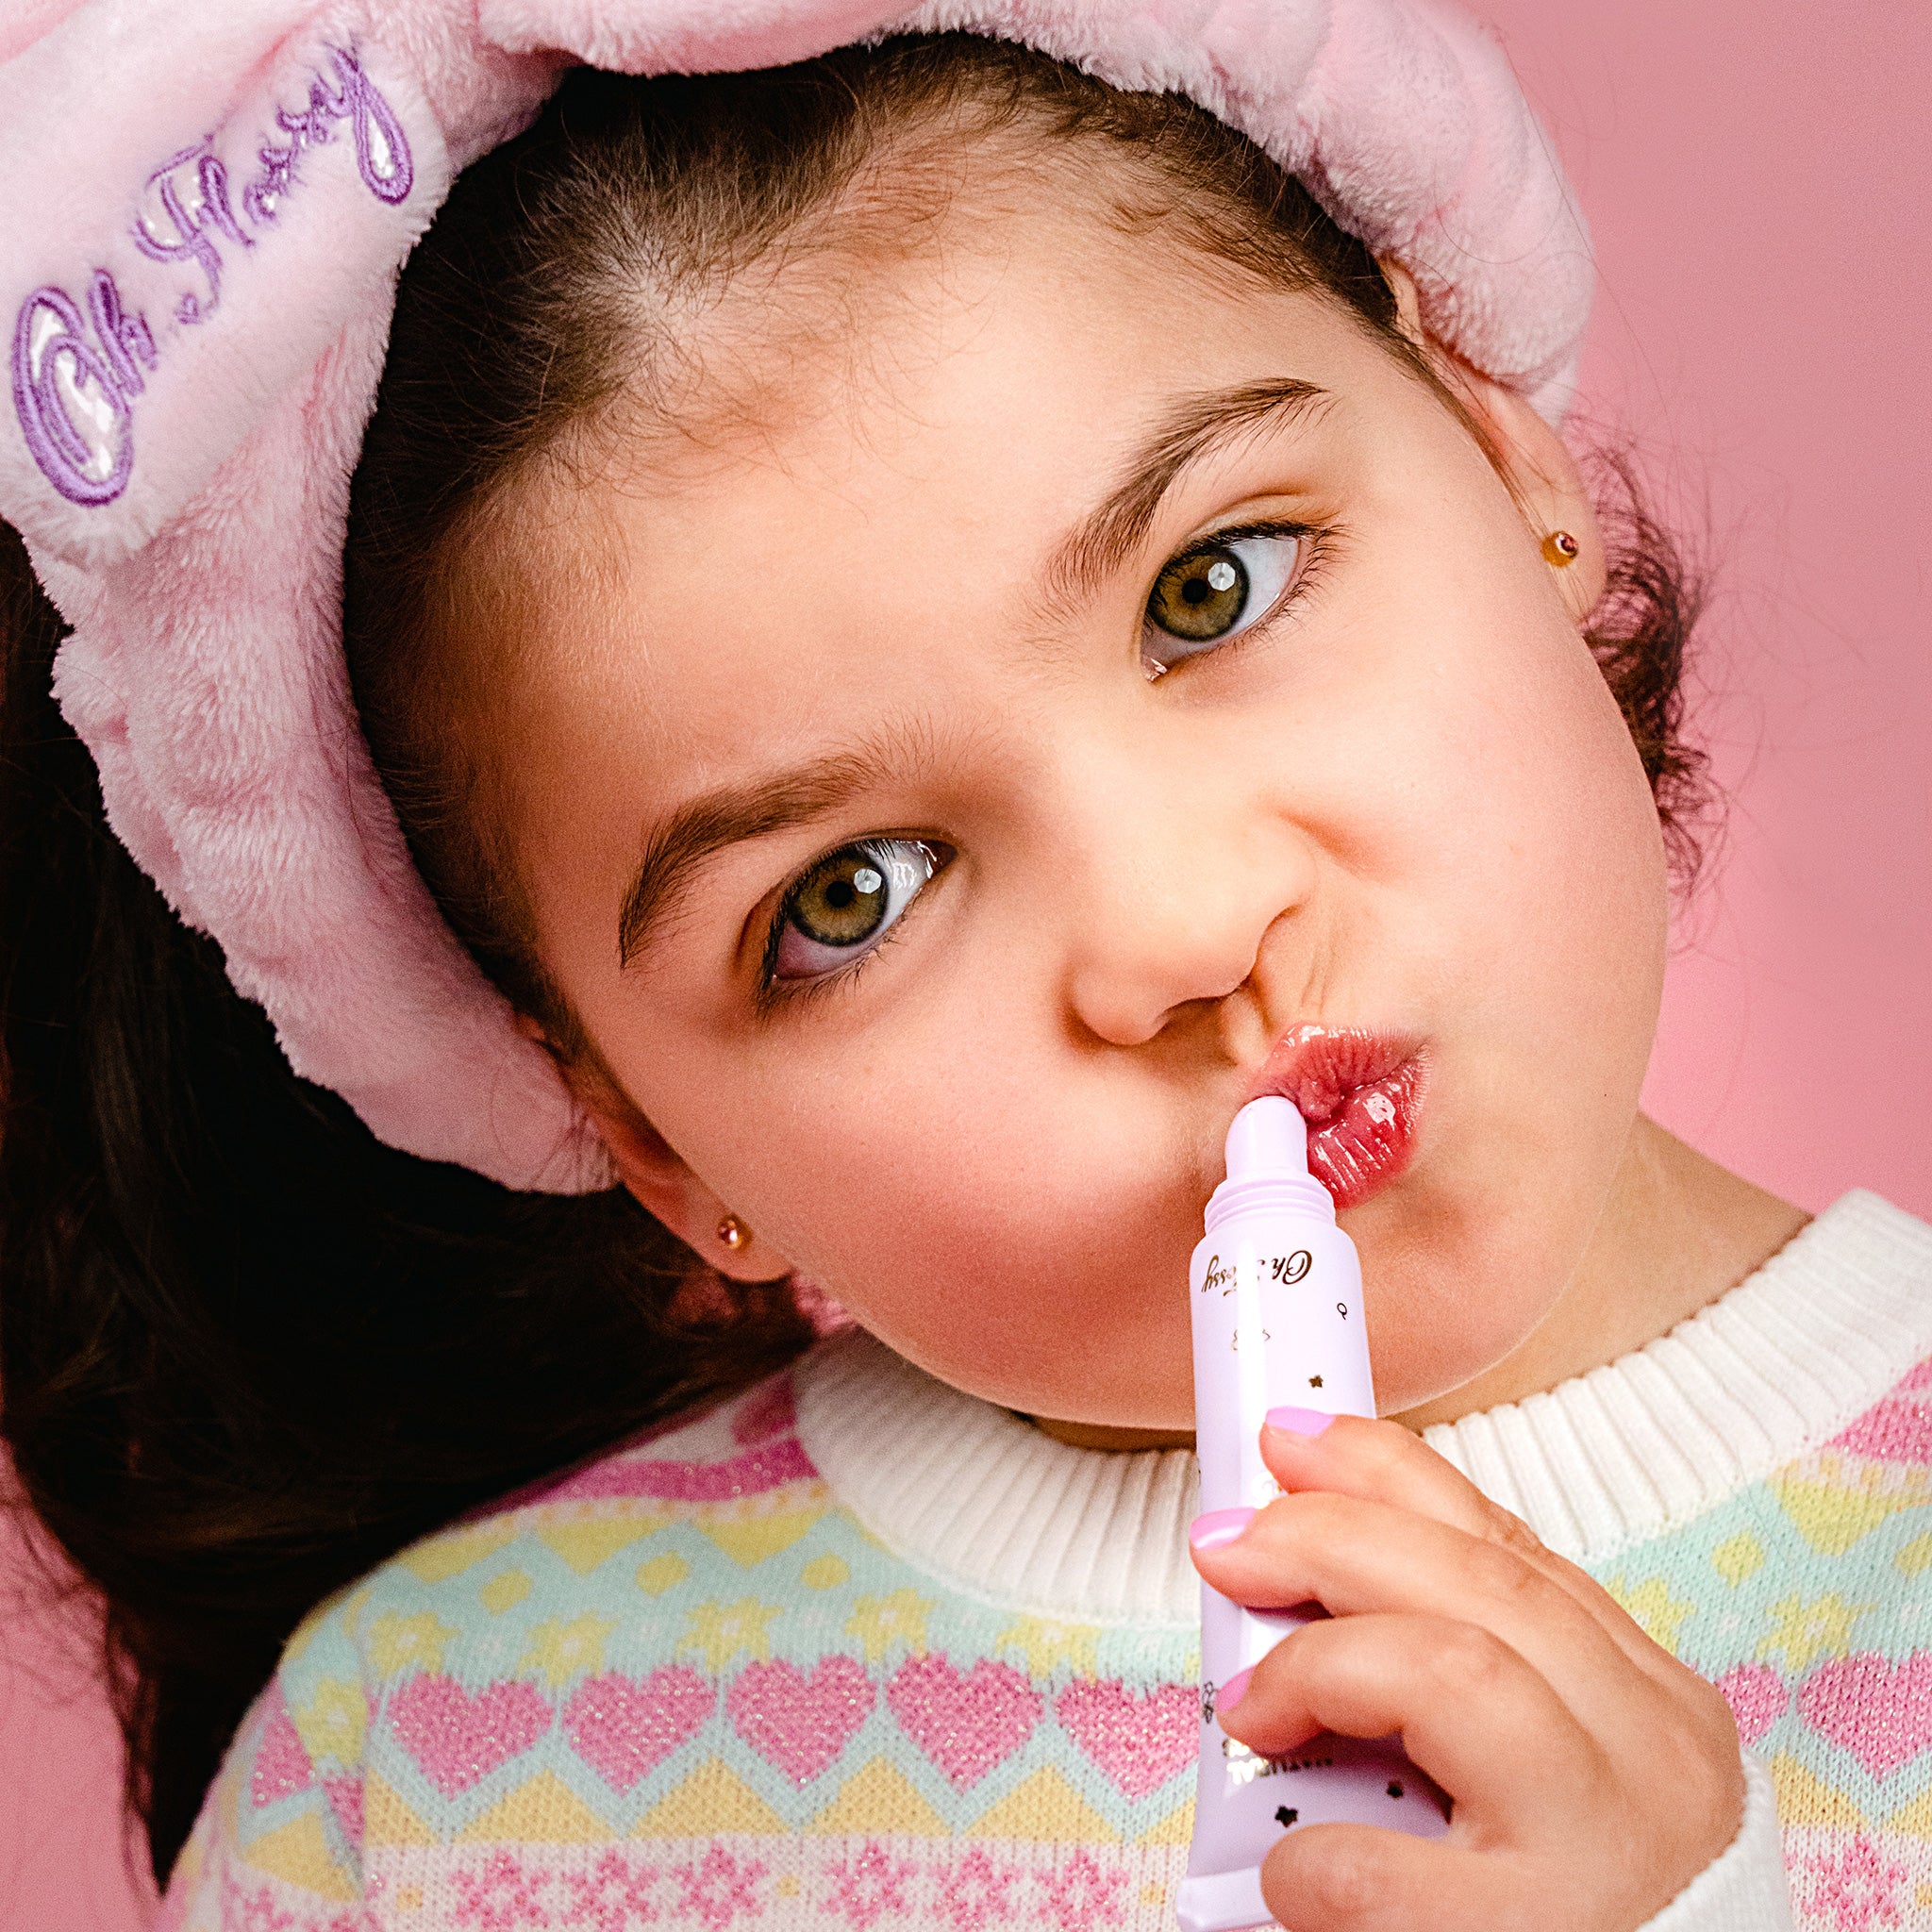 Oh-Flossy-Kids-Natural-Makeup-Lip-gloss-grapy-with-girl